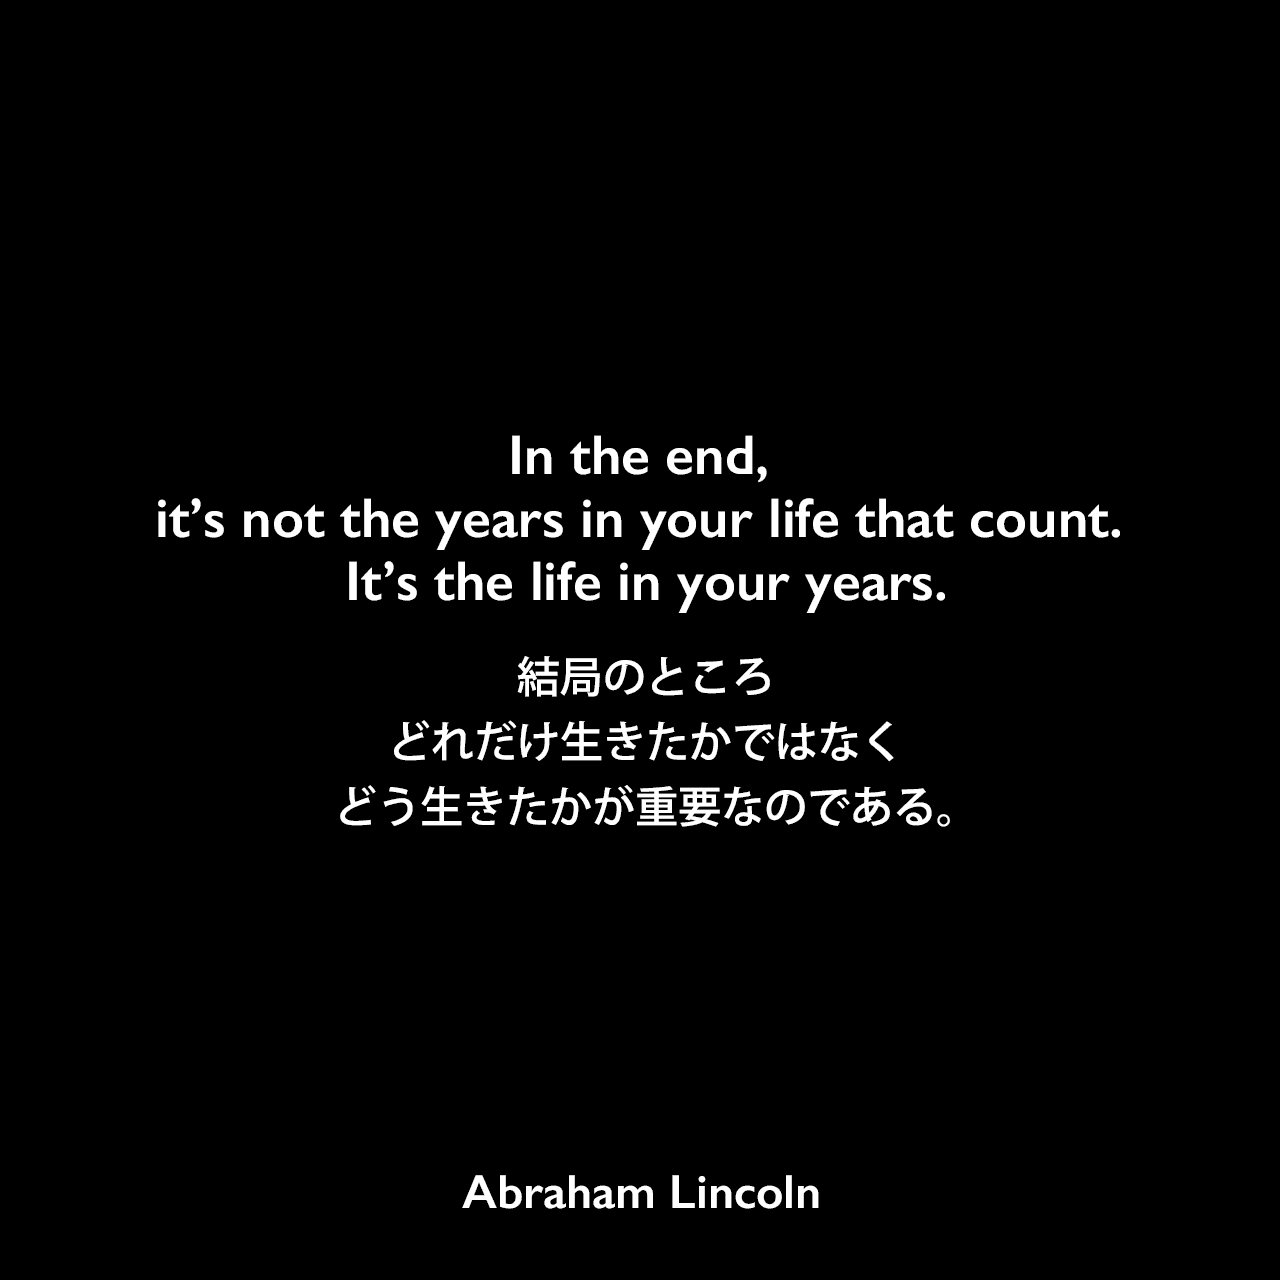 In the end, it’s not the years in your life that count. It’s the life in your years.結局のところ、どれだけ生きたかではなく、どう生きたかが重要なのである。Abraham Lincoln